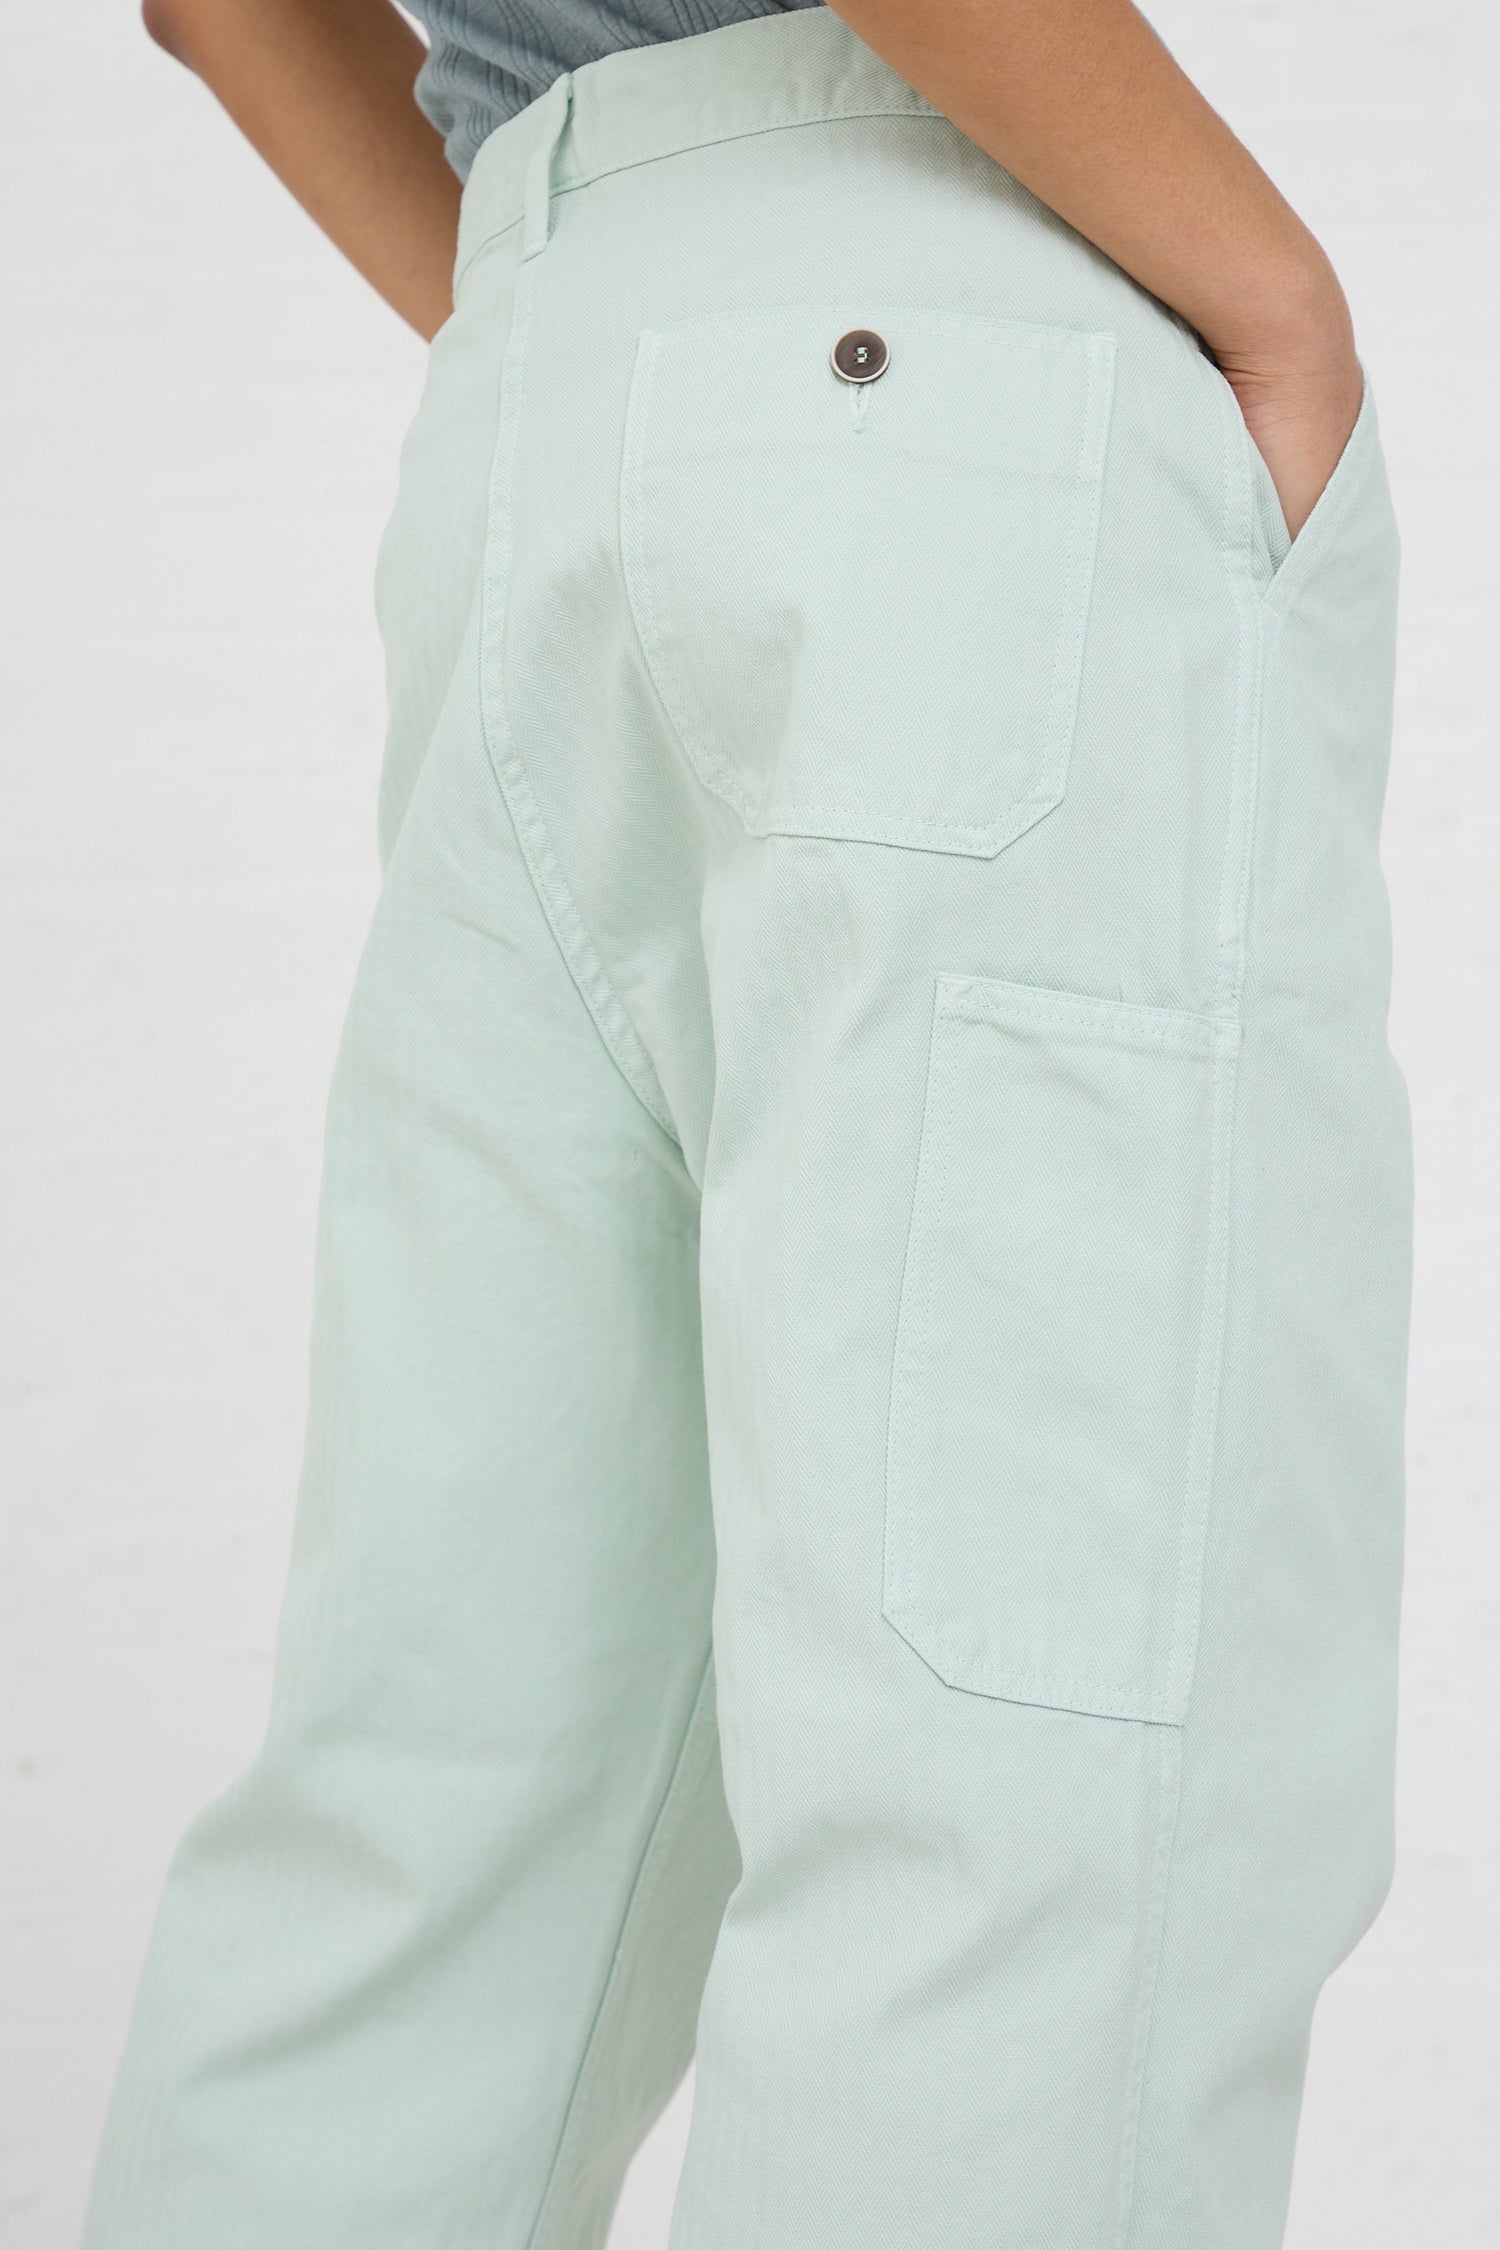 Person wearing Ichi Antiquités Herringbone Garment Dye Pant in Ice Green trousers with a close-up on the back pocket.